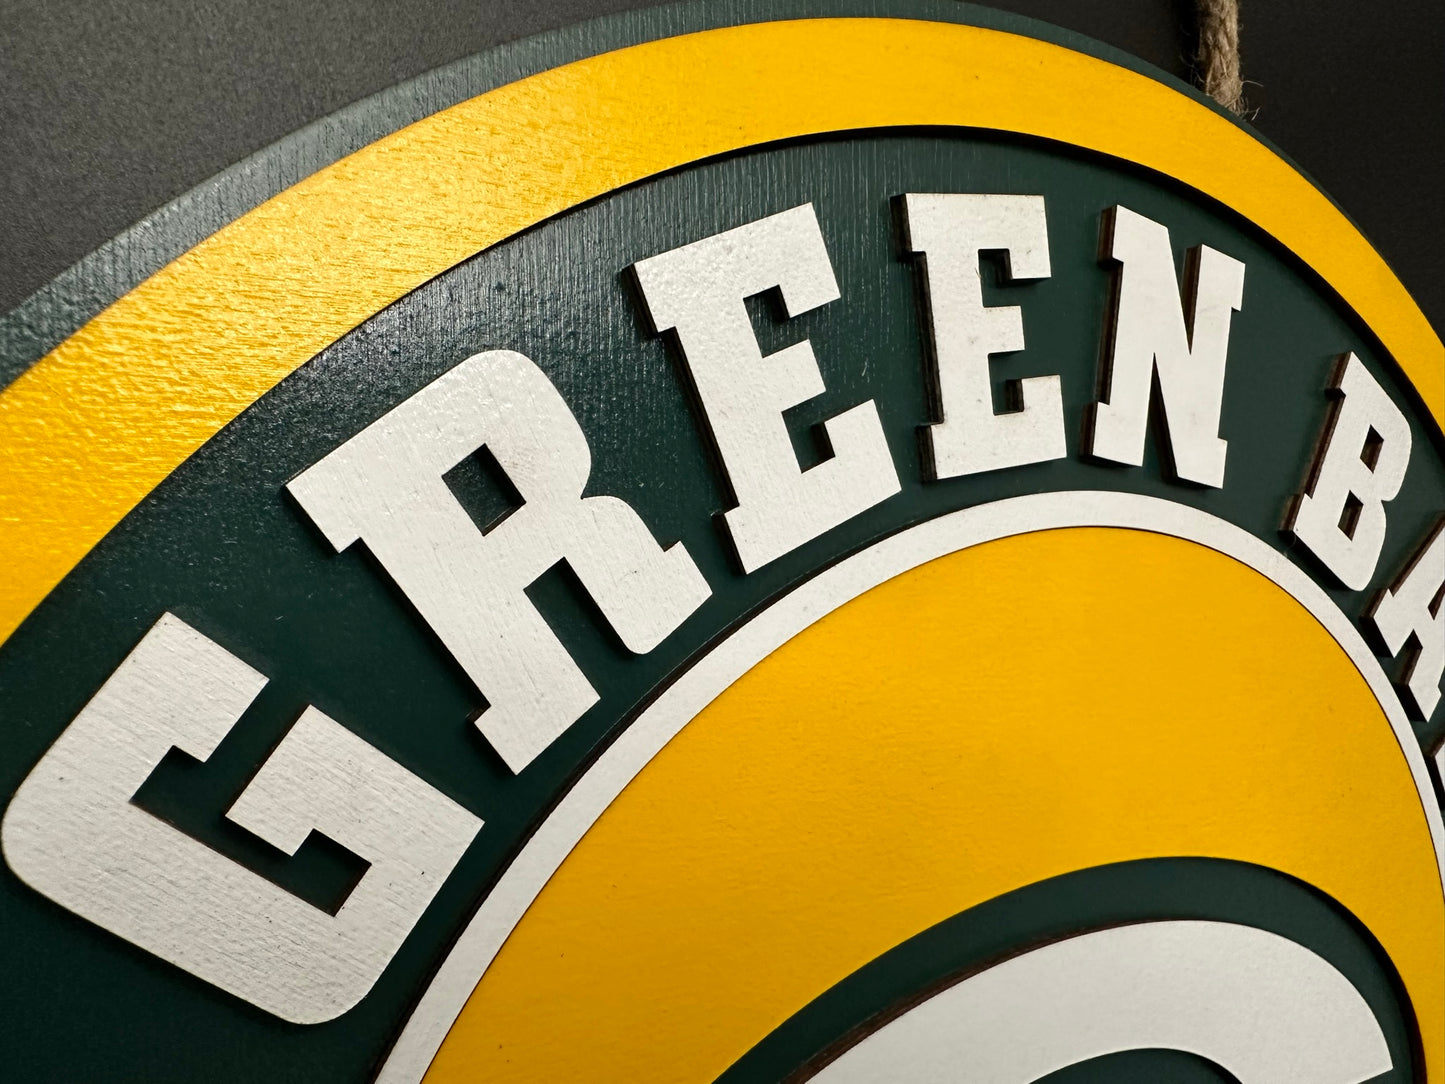 Packers 3D Wood Sign